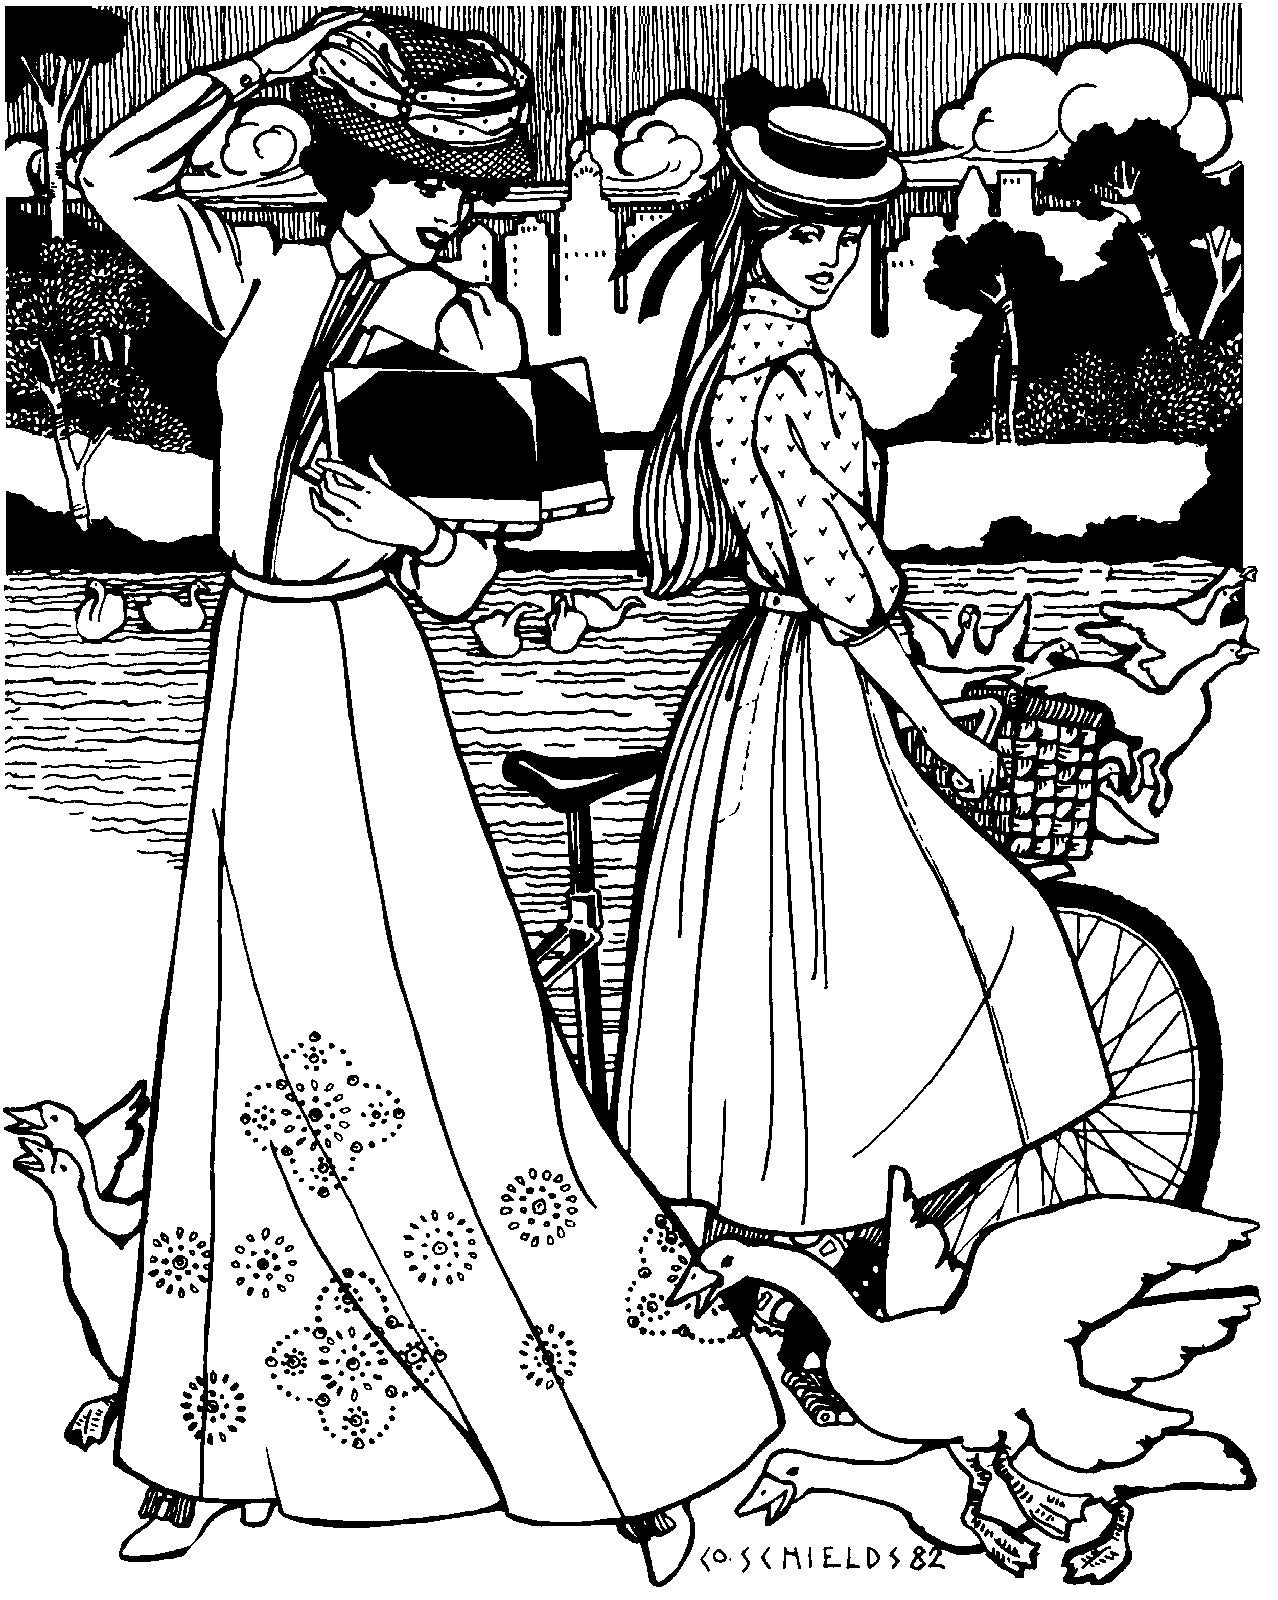 Black and white pen and ink drawing by Gretchen Schields. Two women one riding a bike the other walking with books in her hands books at the ducks surrounding their feet by a pond. Both women are wearing 209 Walking Skirt.